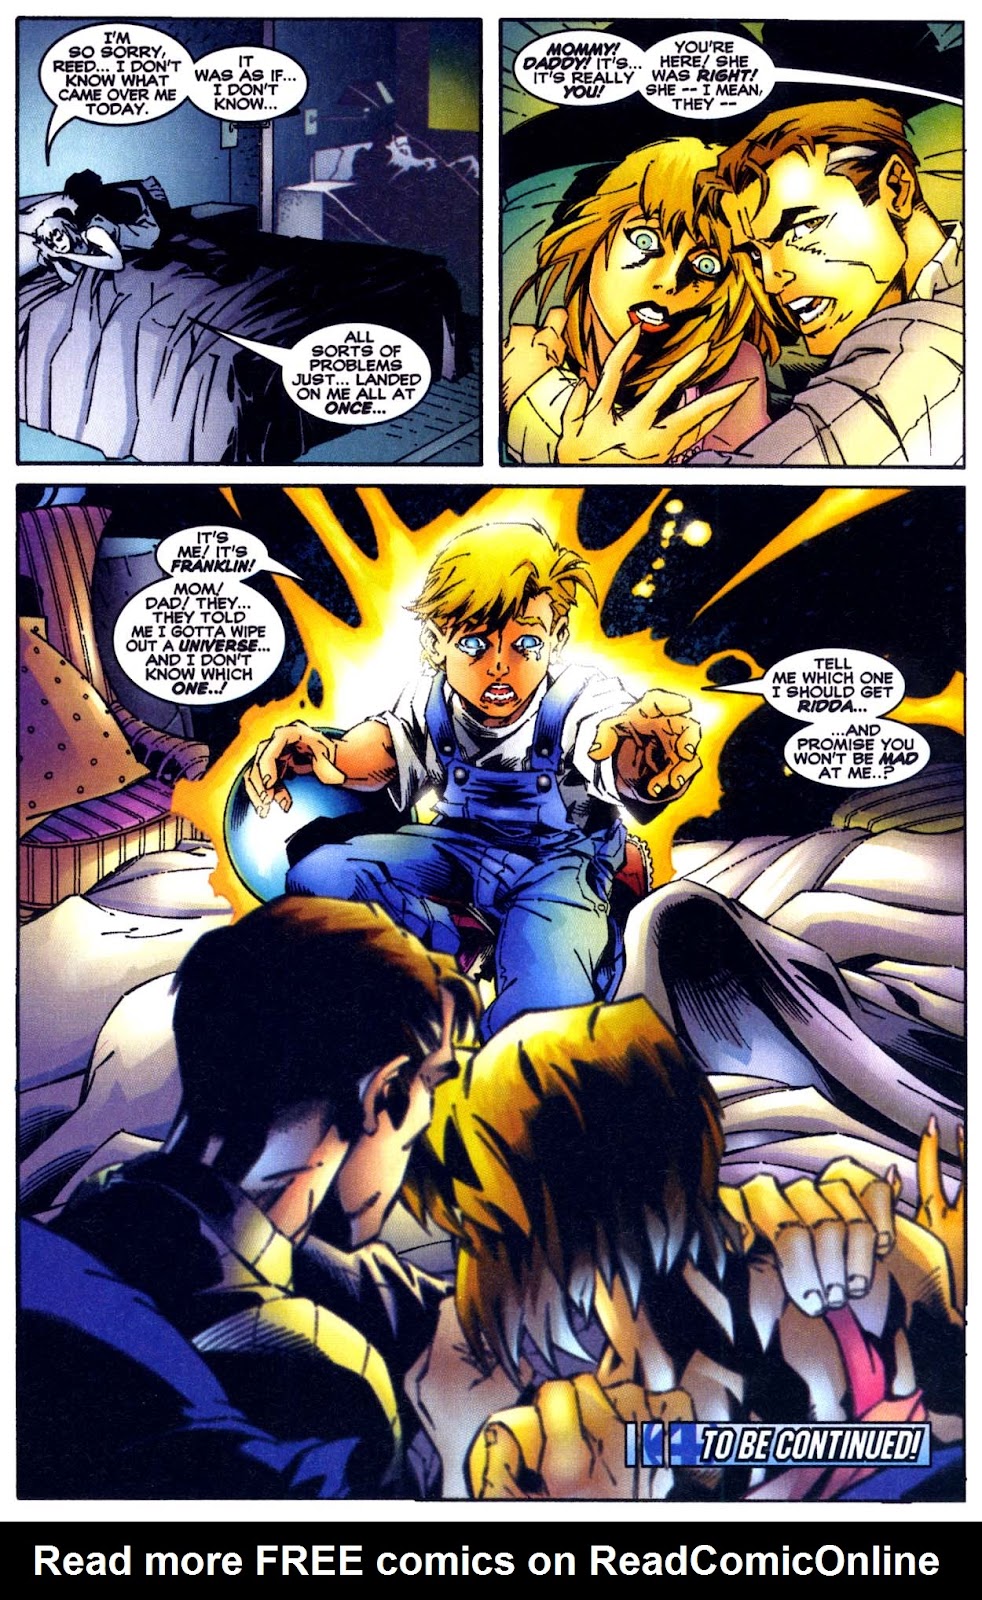 Heroes Reborn: The Return issue 1 - Page 28